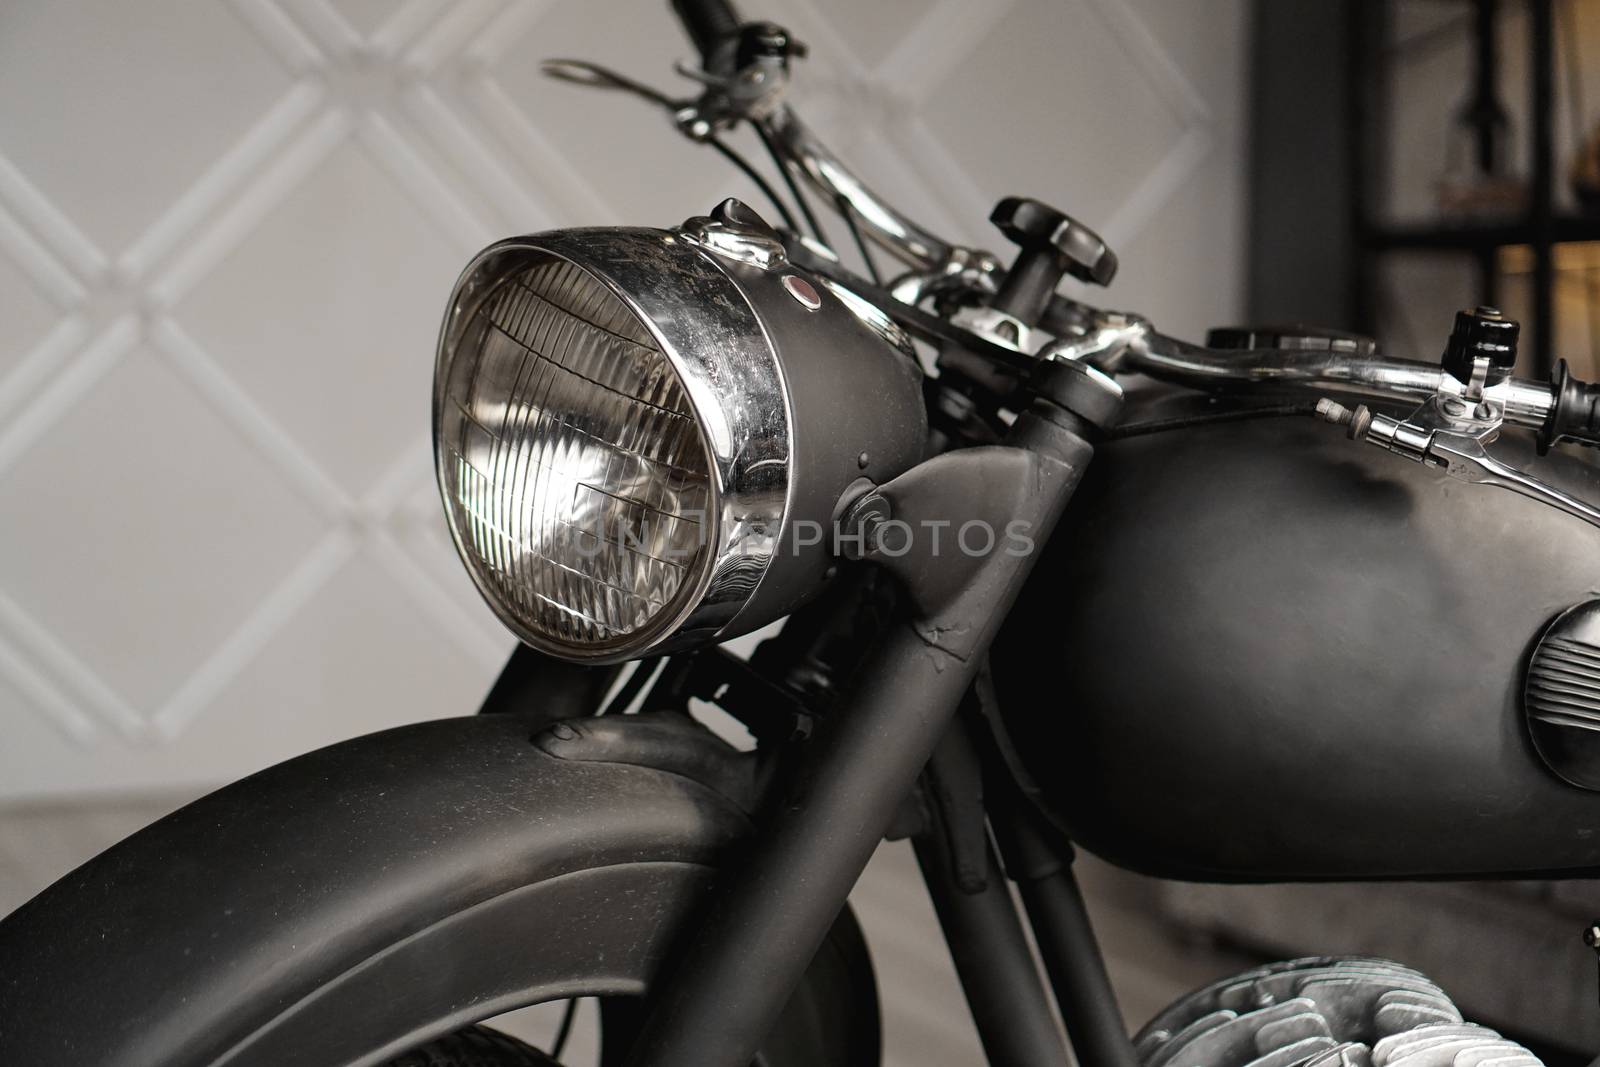 Motorcycle close-up in the room. Photo from the studio